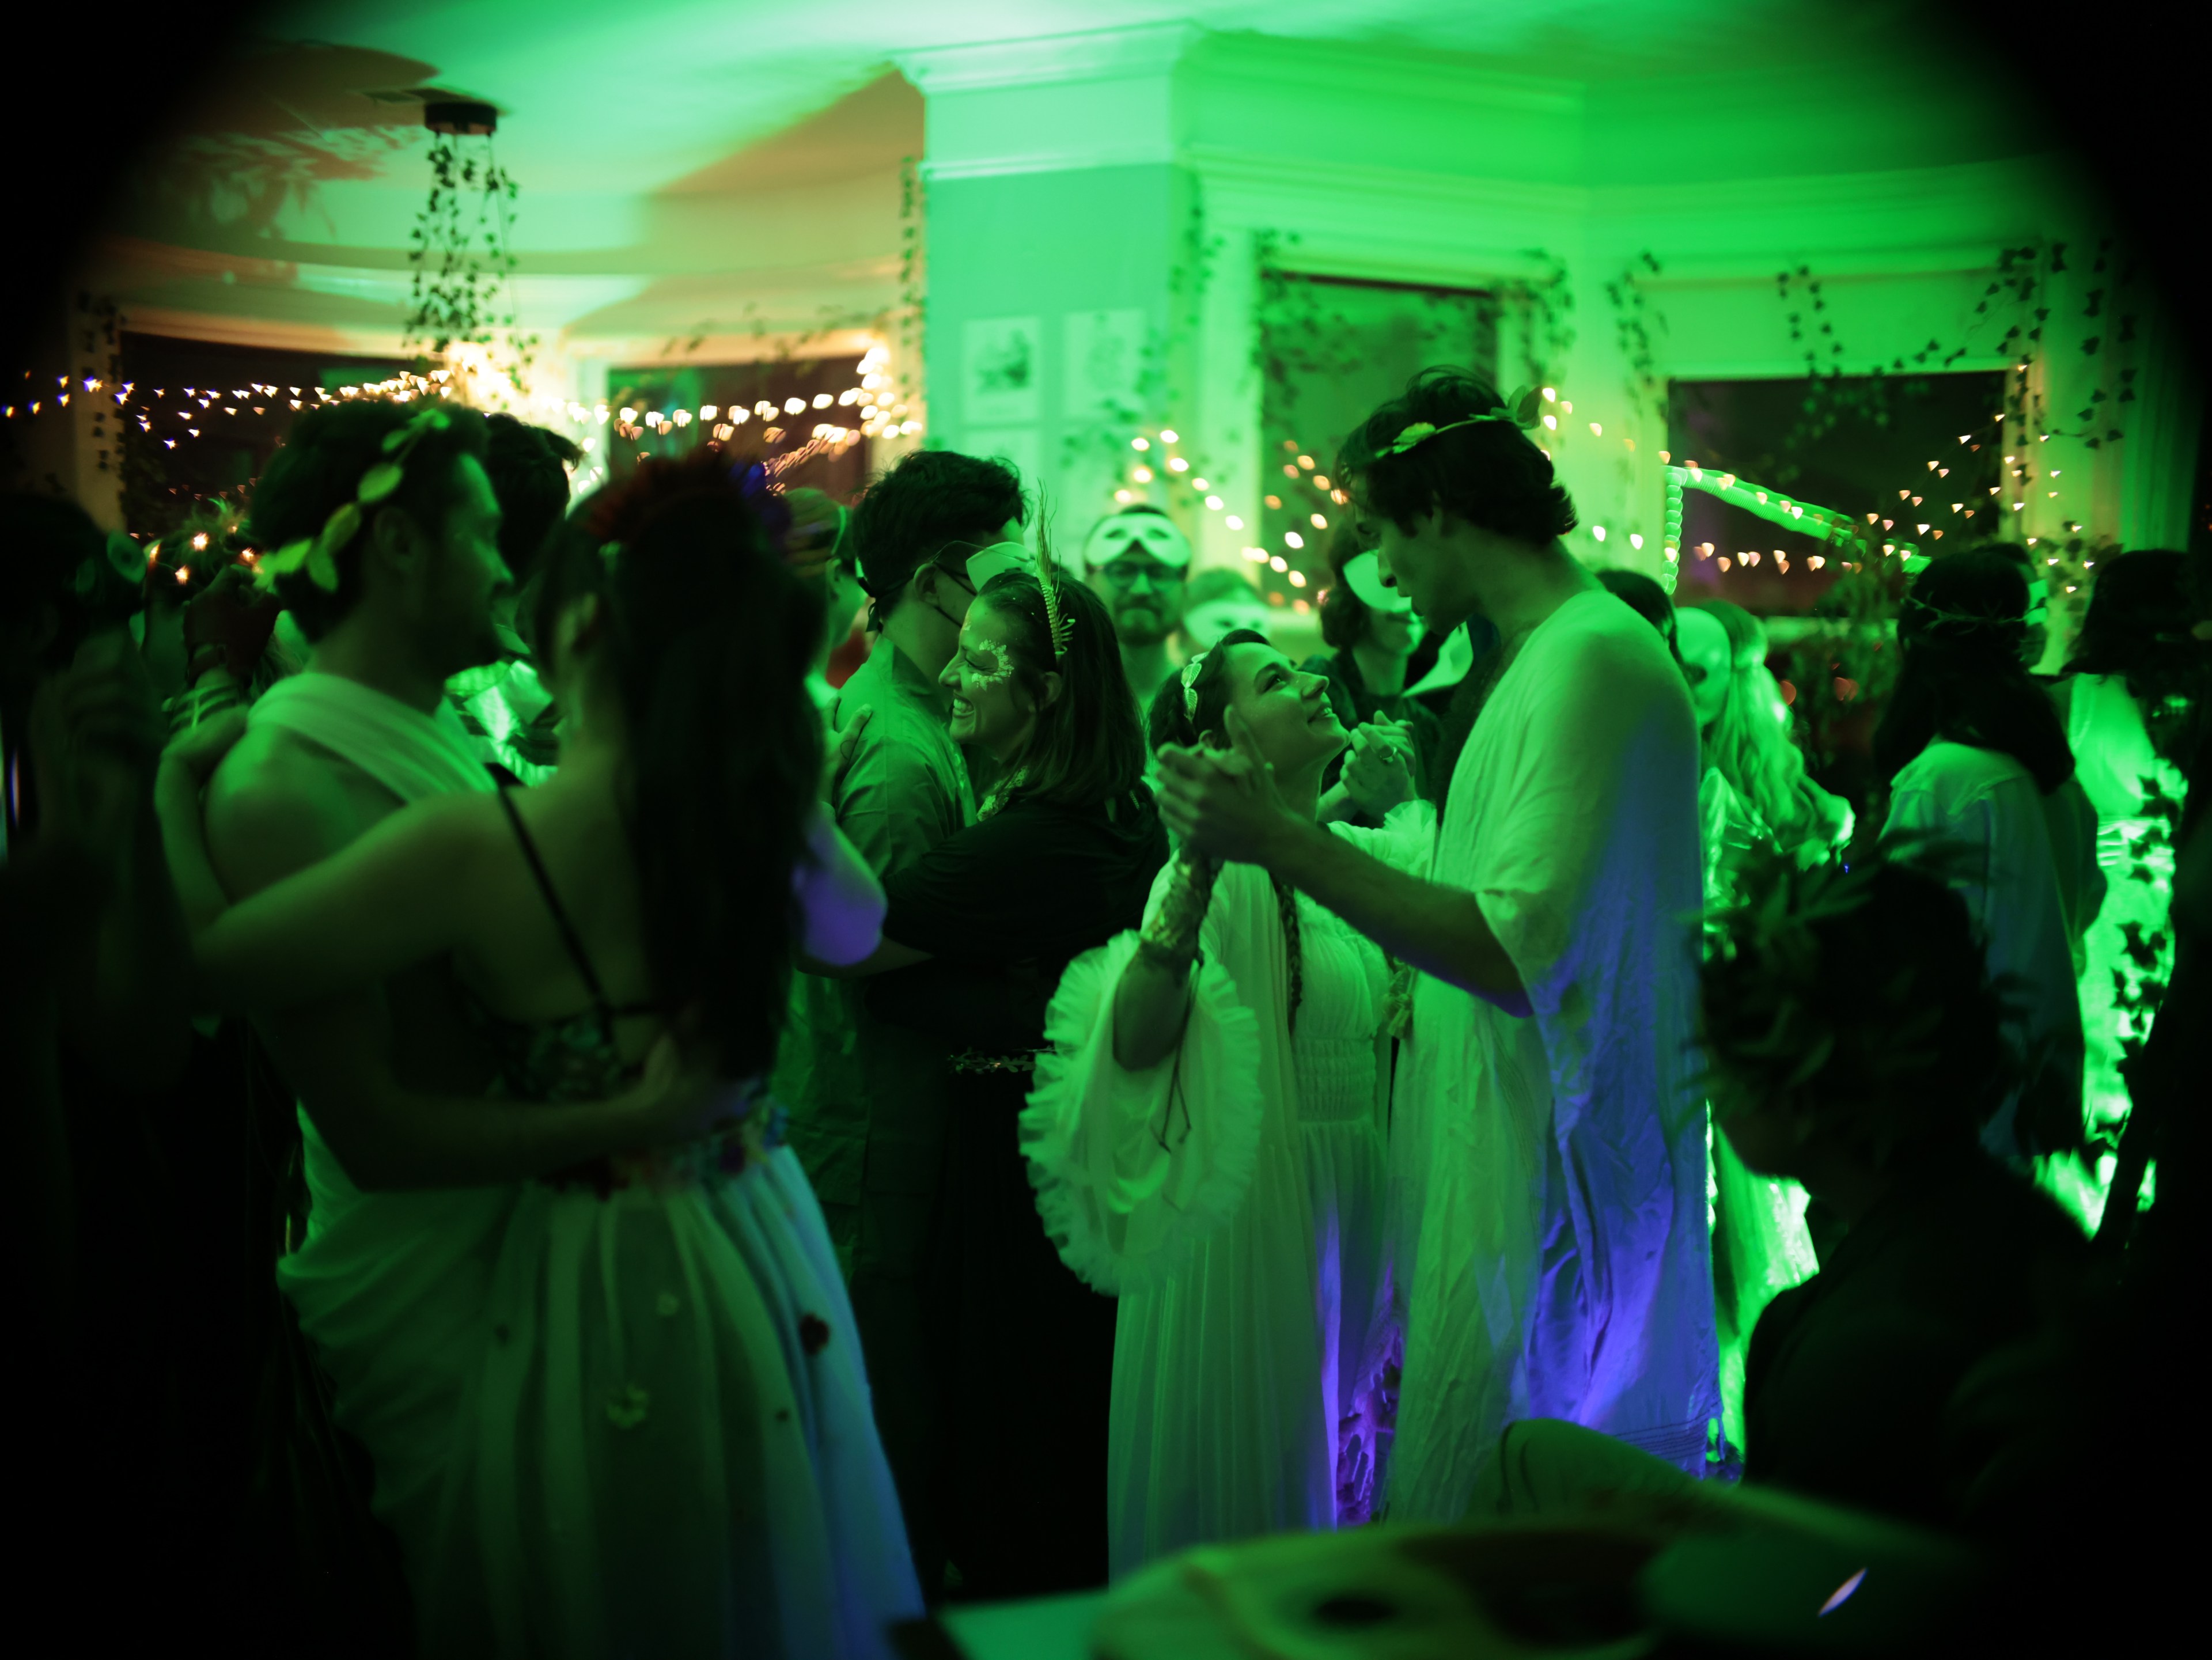 Couples dance in a room with green lighting, decorations and string lights.